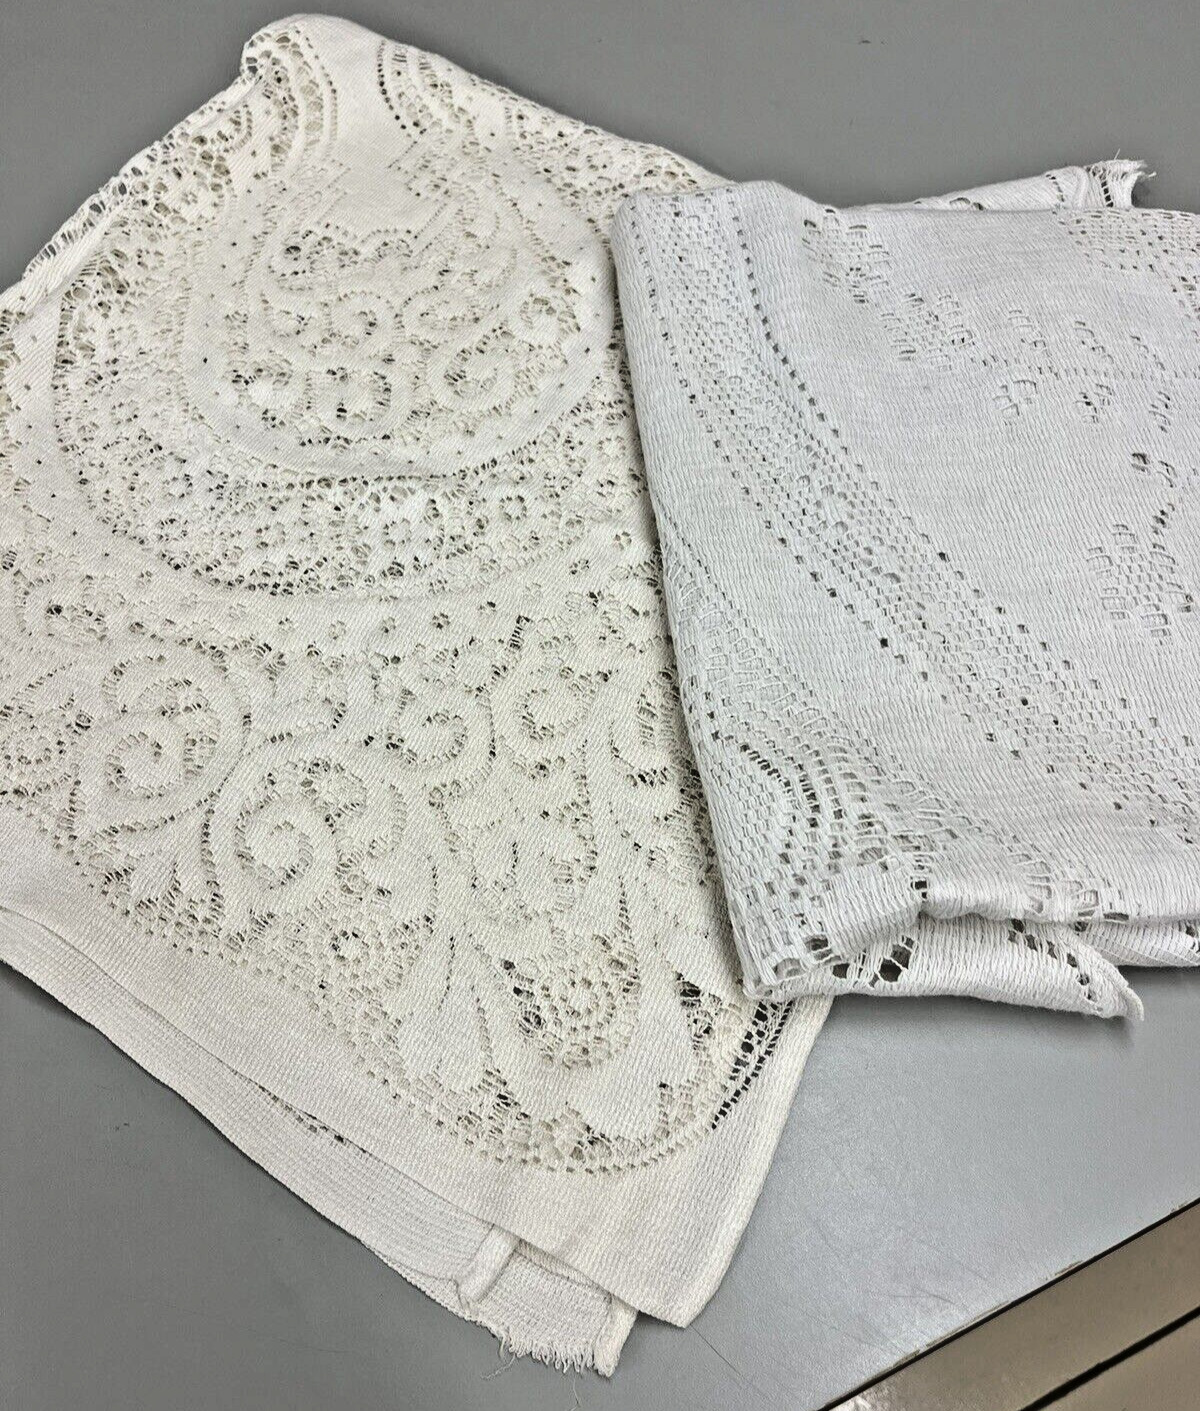 Lot of TWO Vintage Lace Tablecloths Table Toppers Cover Doily 1 Round; 1 Square